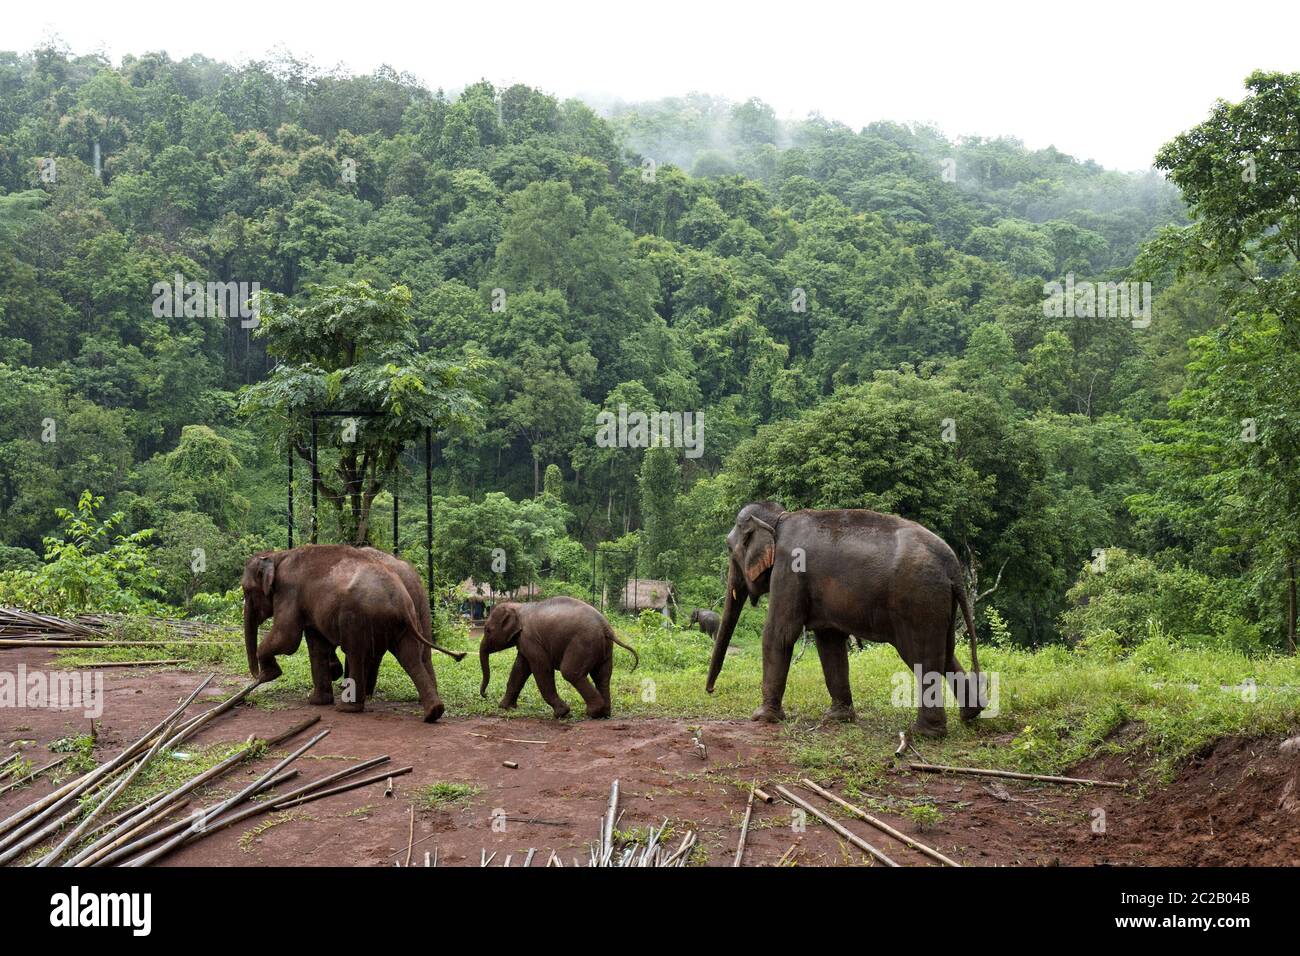 Elephants at the Patara Elephant Farm, in the jungle forest of Chang Mai. Stock Photo